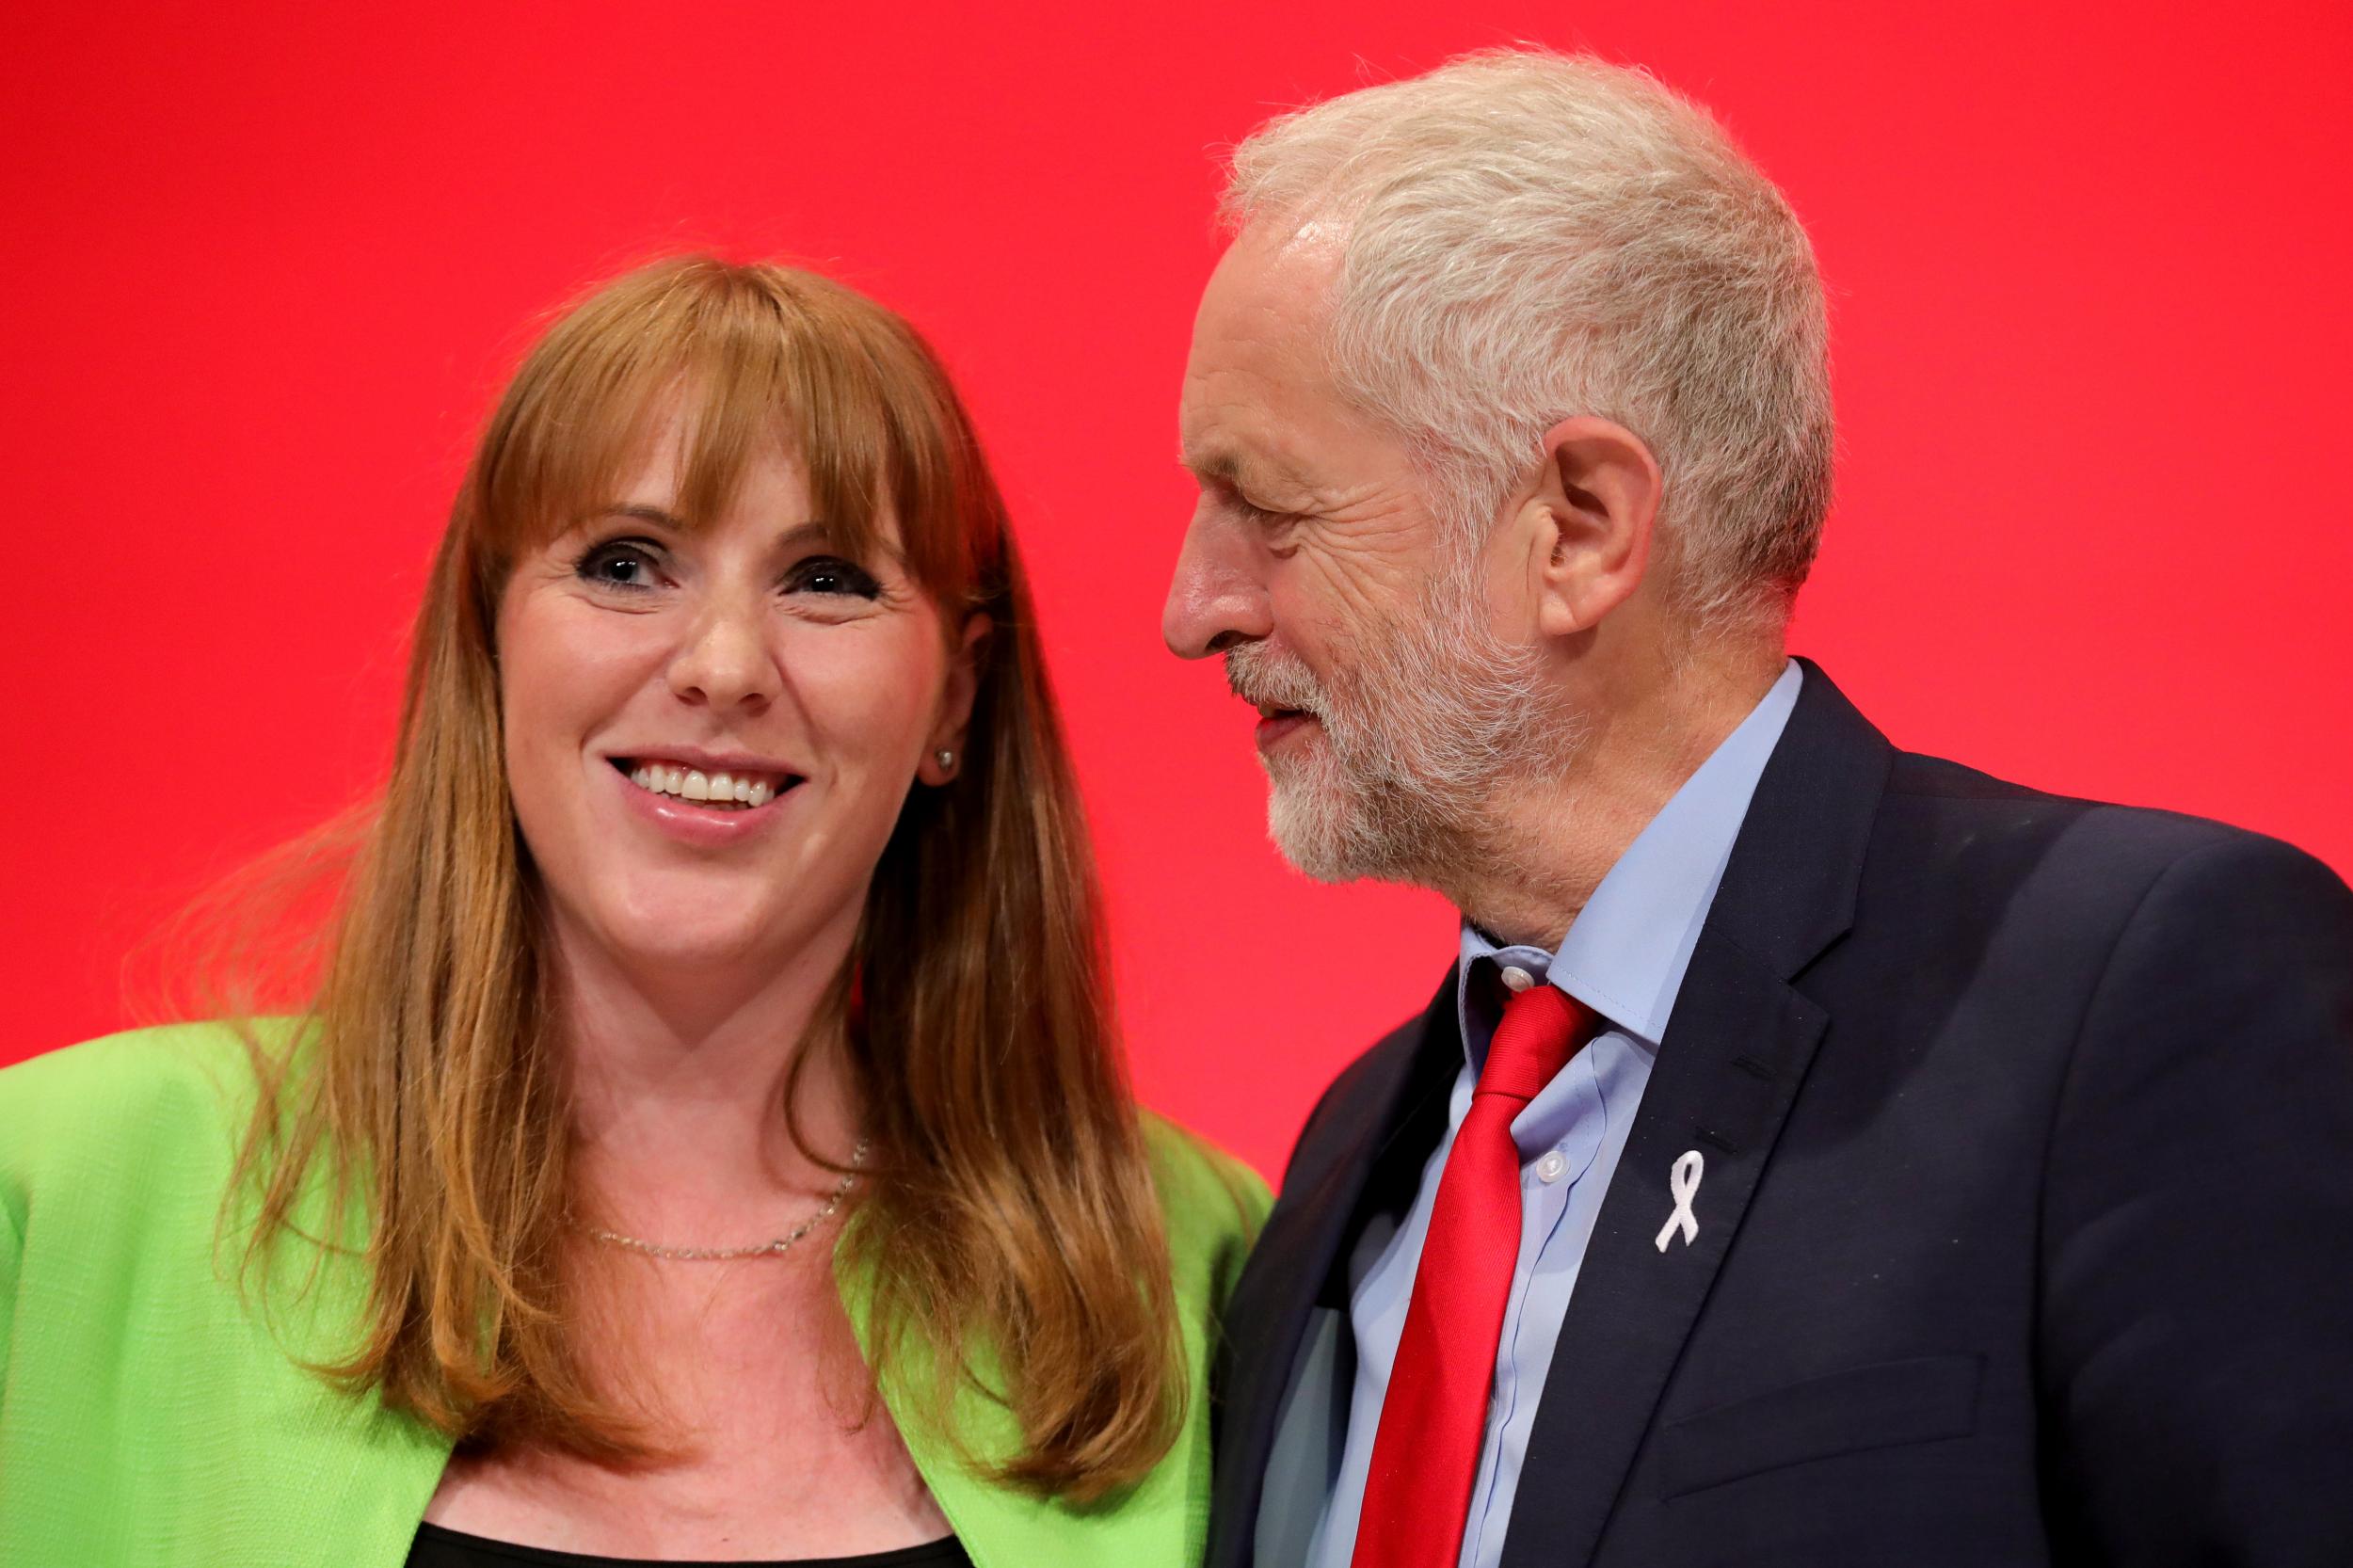 Shadow Education Secretary Angela Rayner has hinted tuition fees would be scrapped by Labour